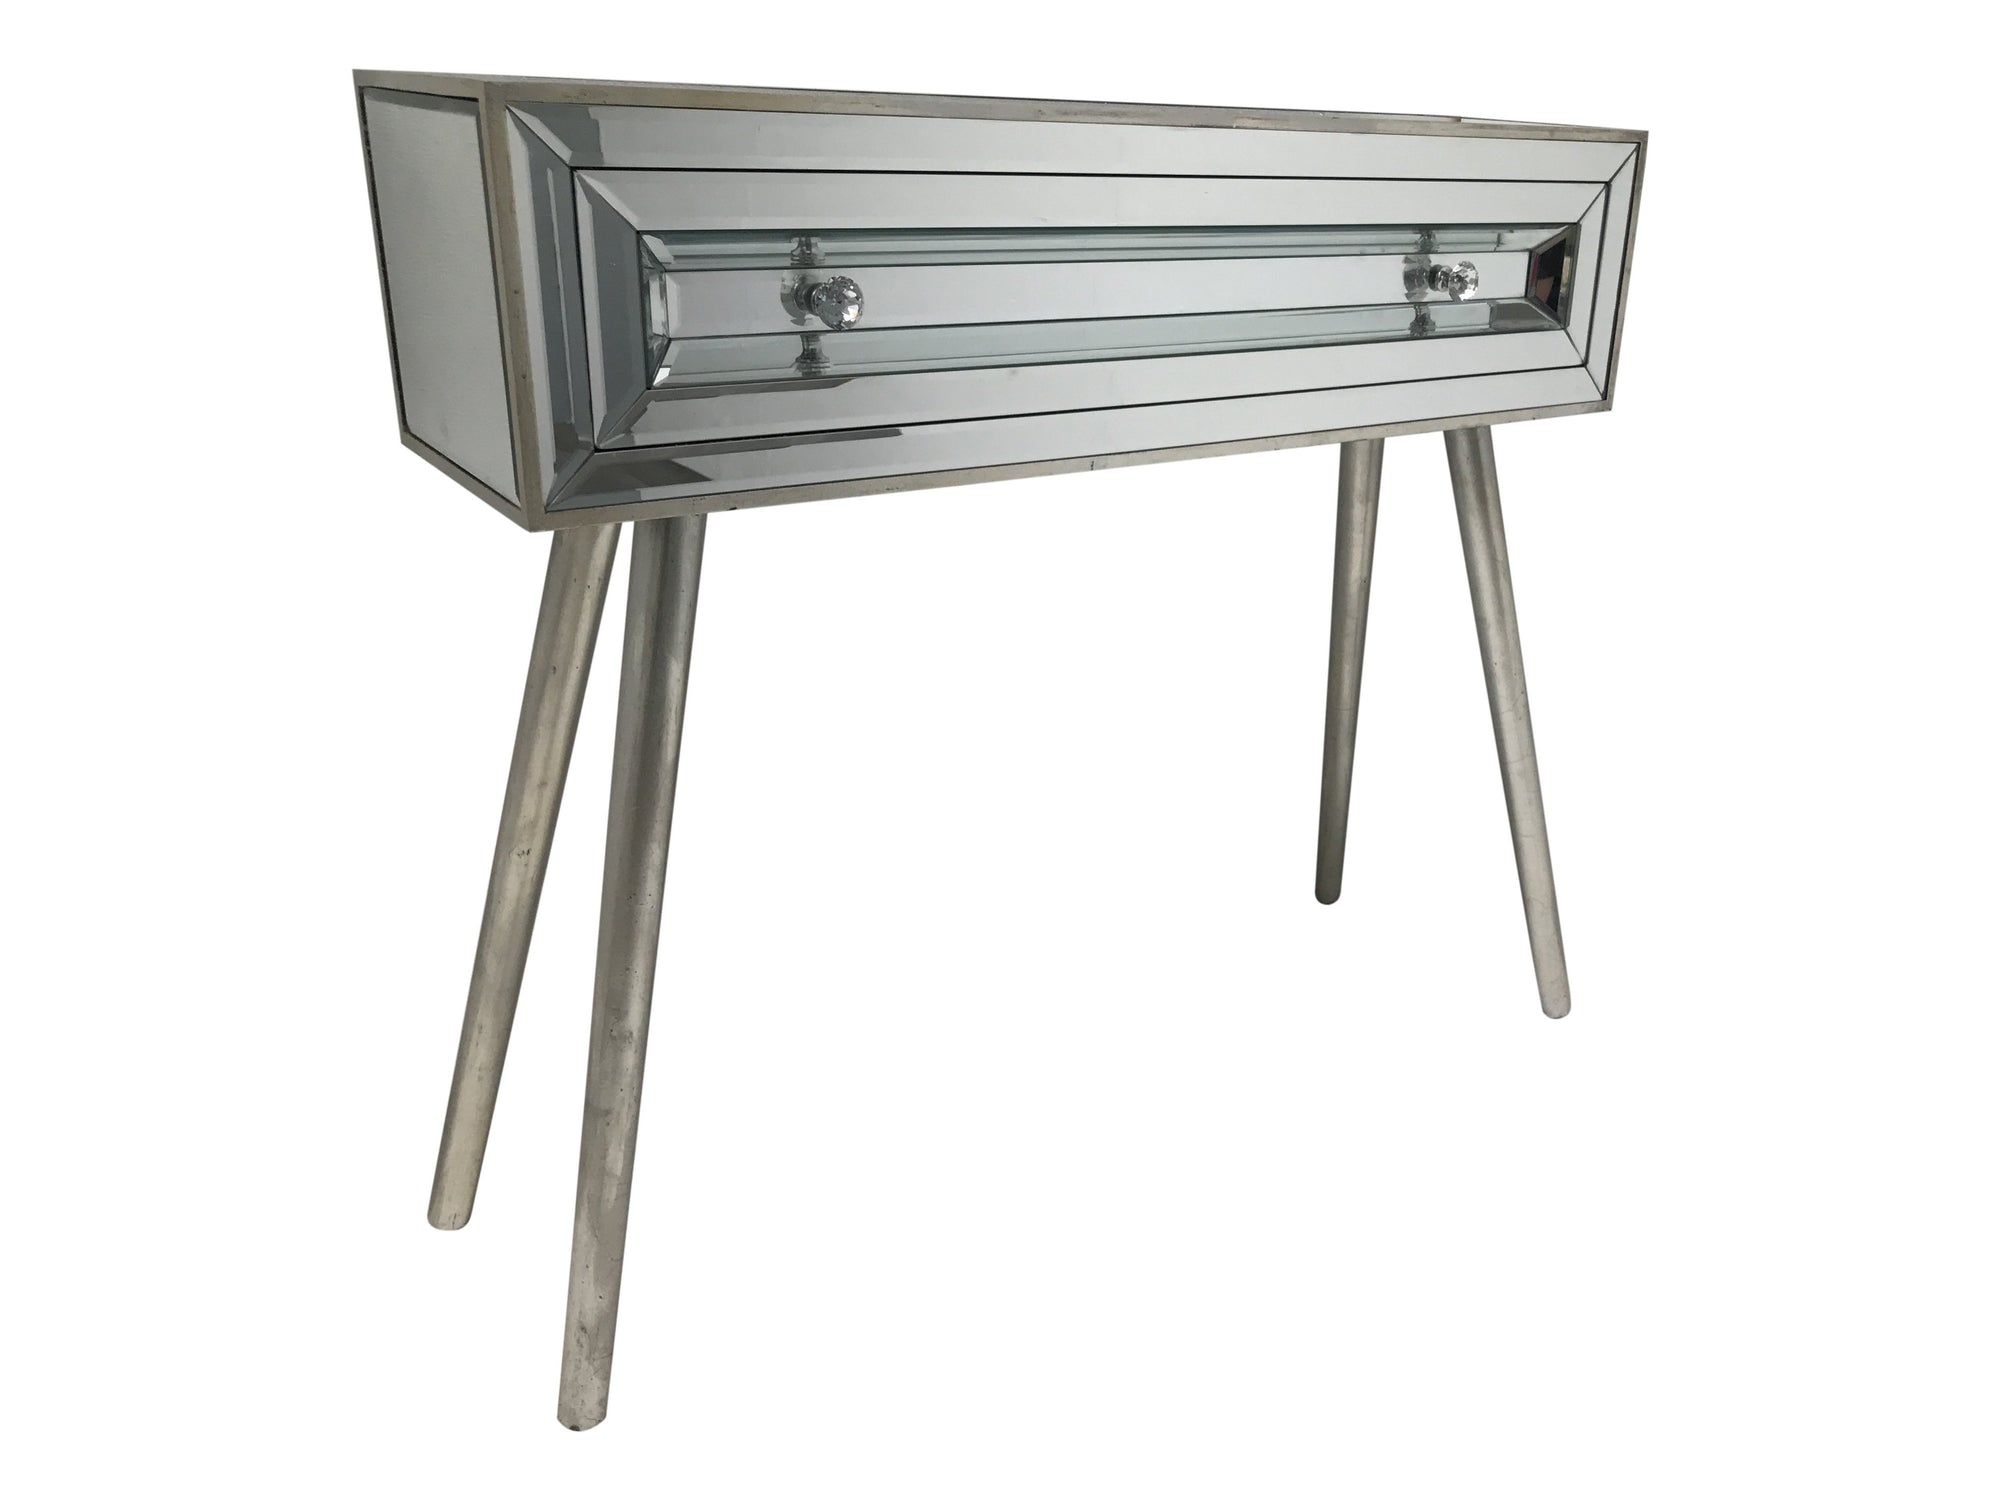 Mirrored console table with a single drawer, view from the font